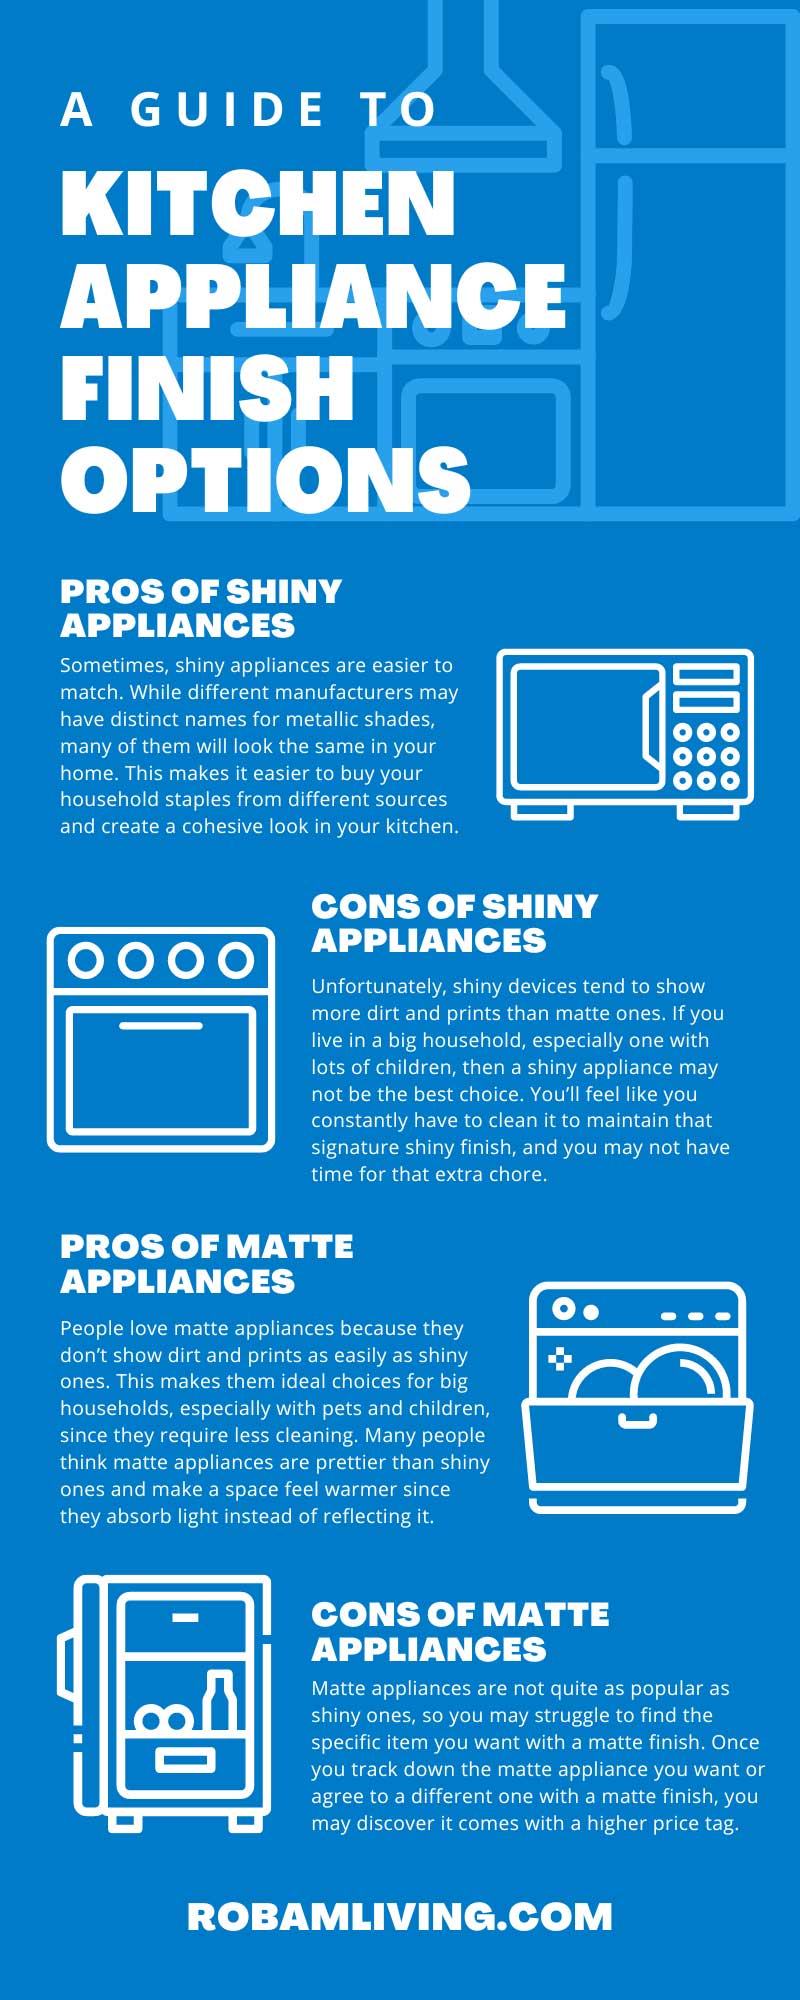 A Guide to Kitchen Appliance Finish Options